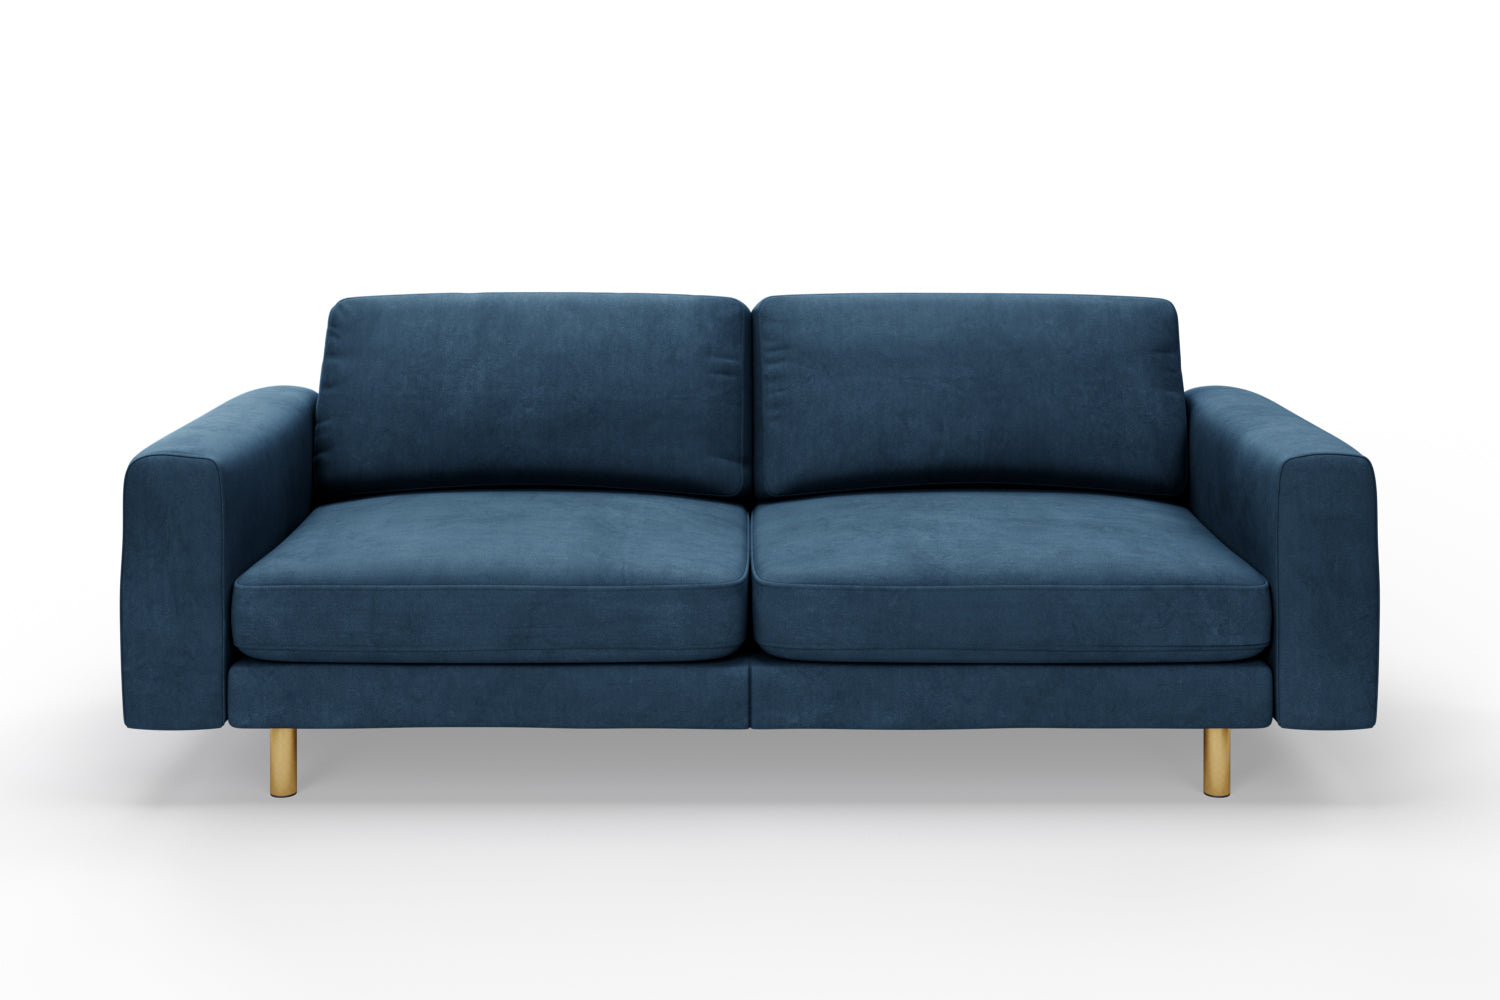 SNUG | The Big Chill 3 Seater Sofa in Blue Steel variant_40414878302256